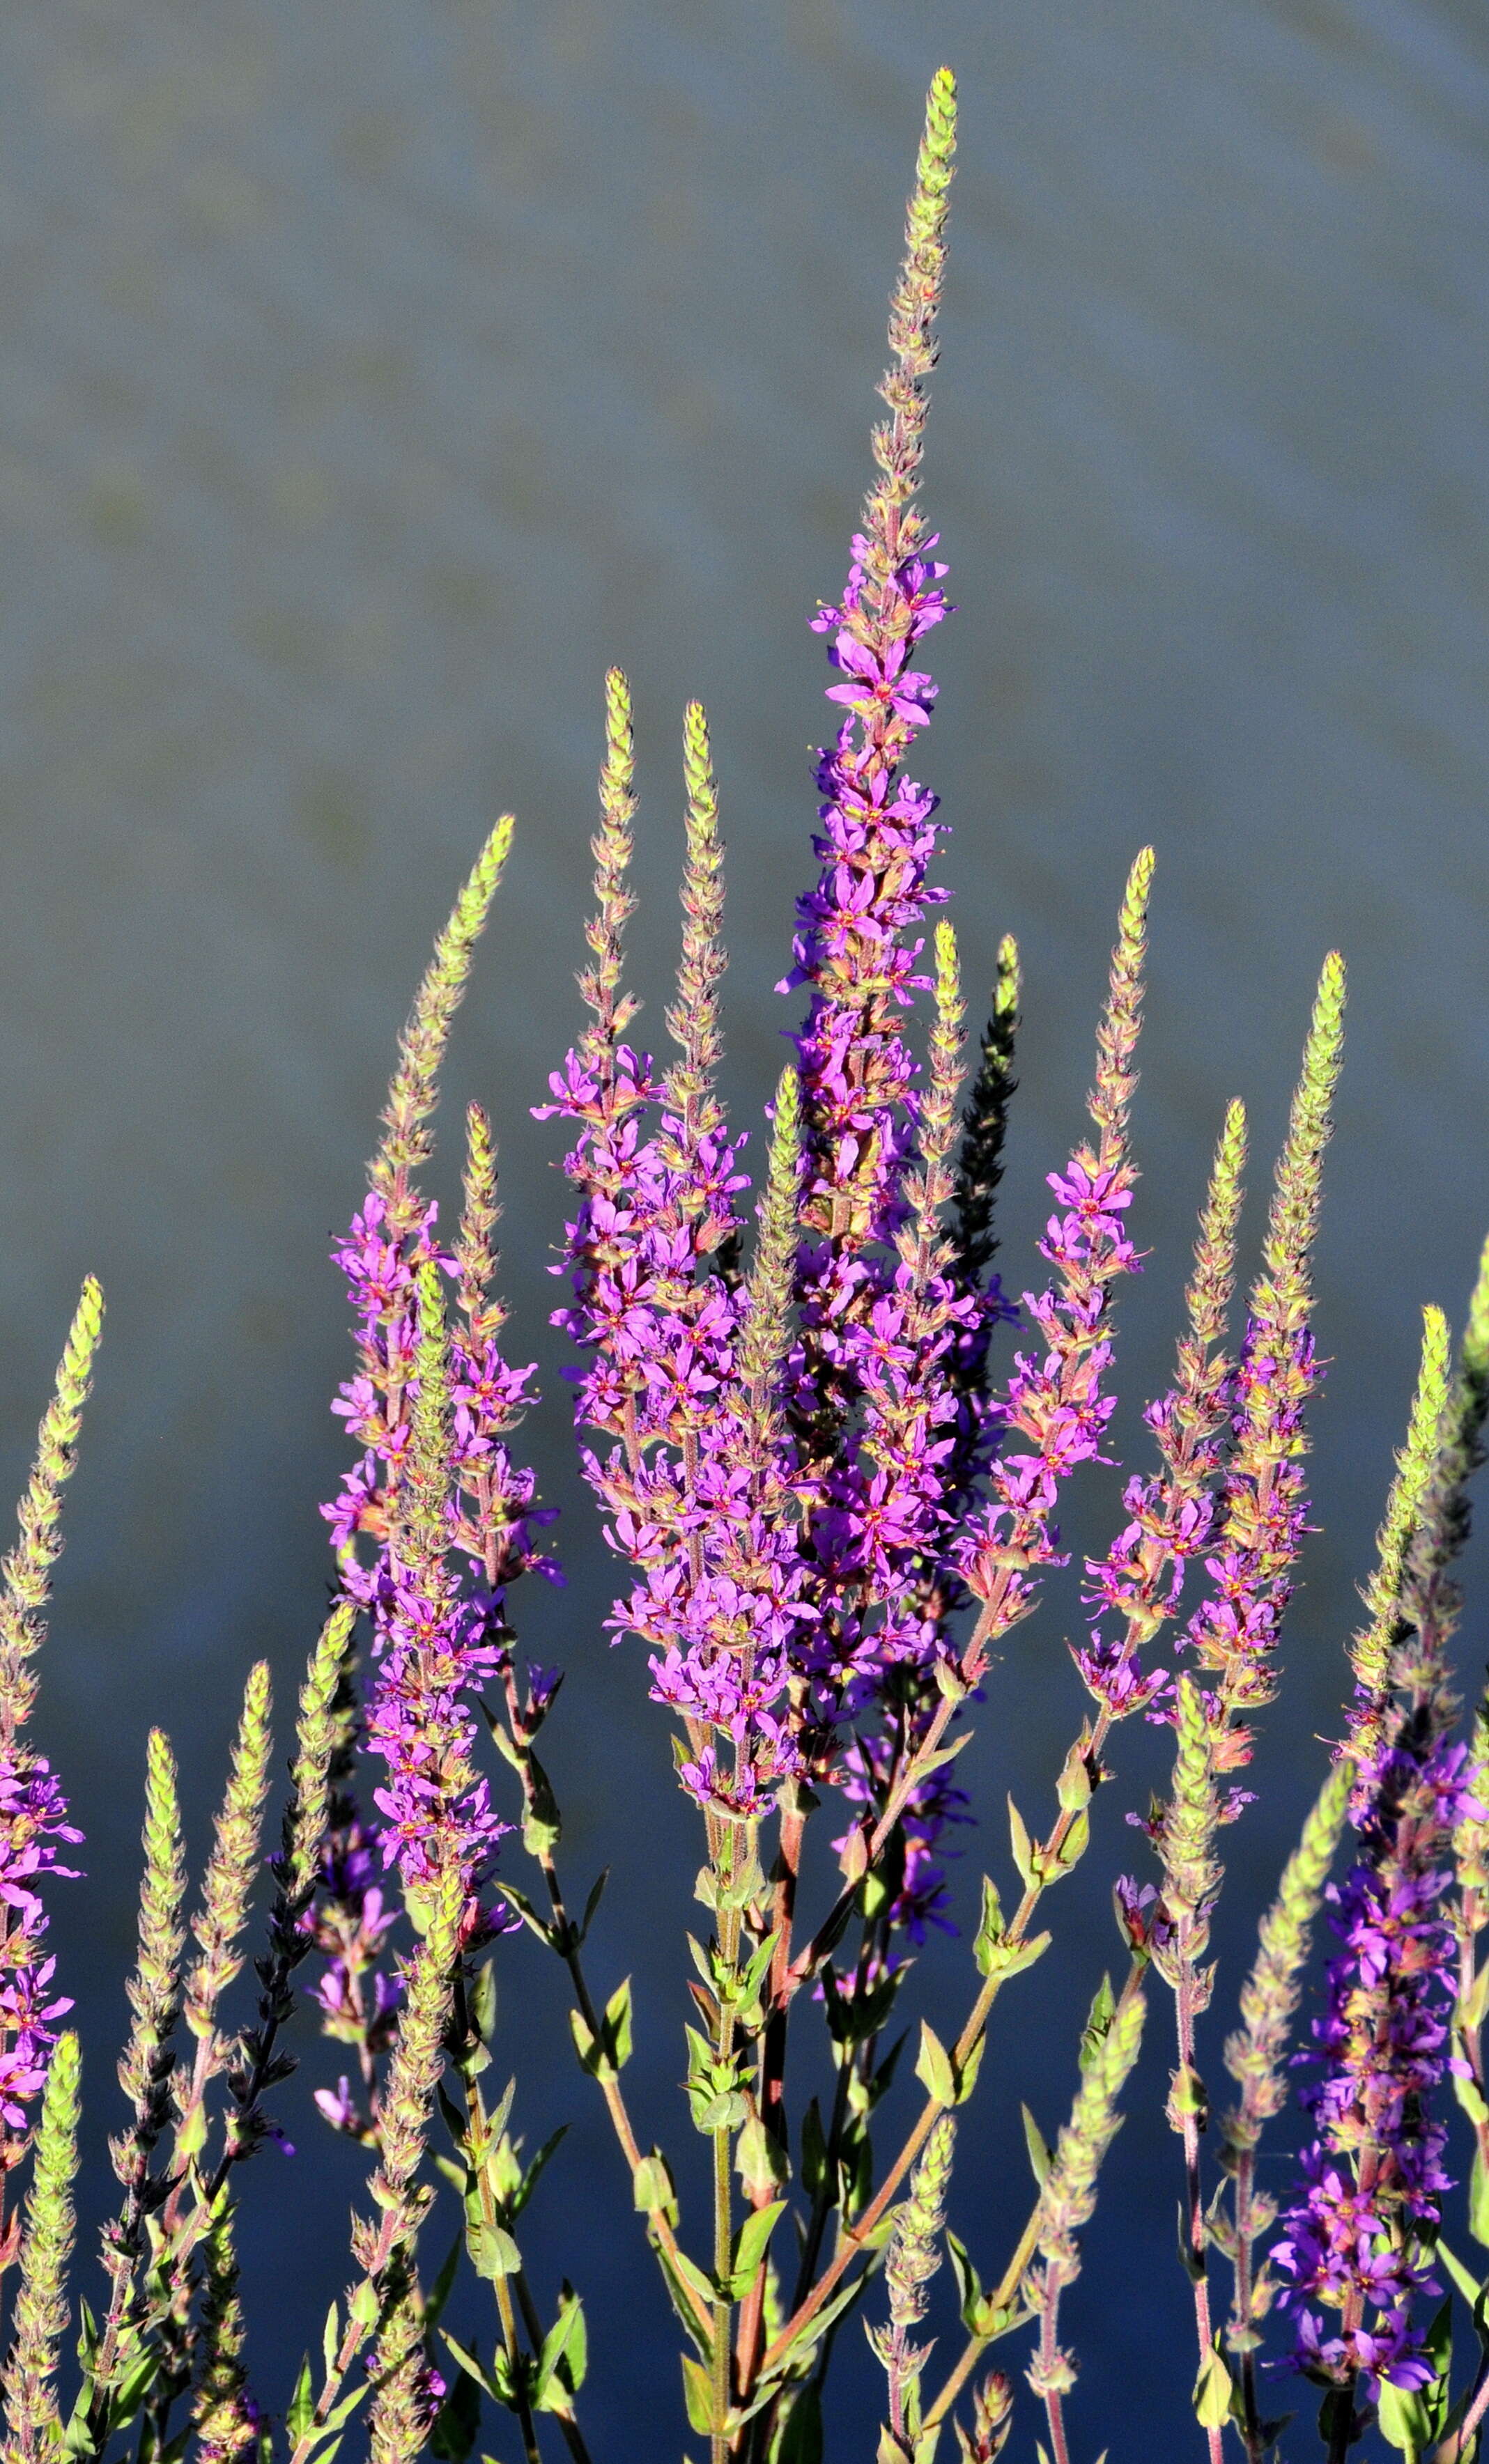 Image of loosestrife